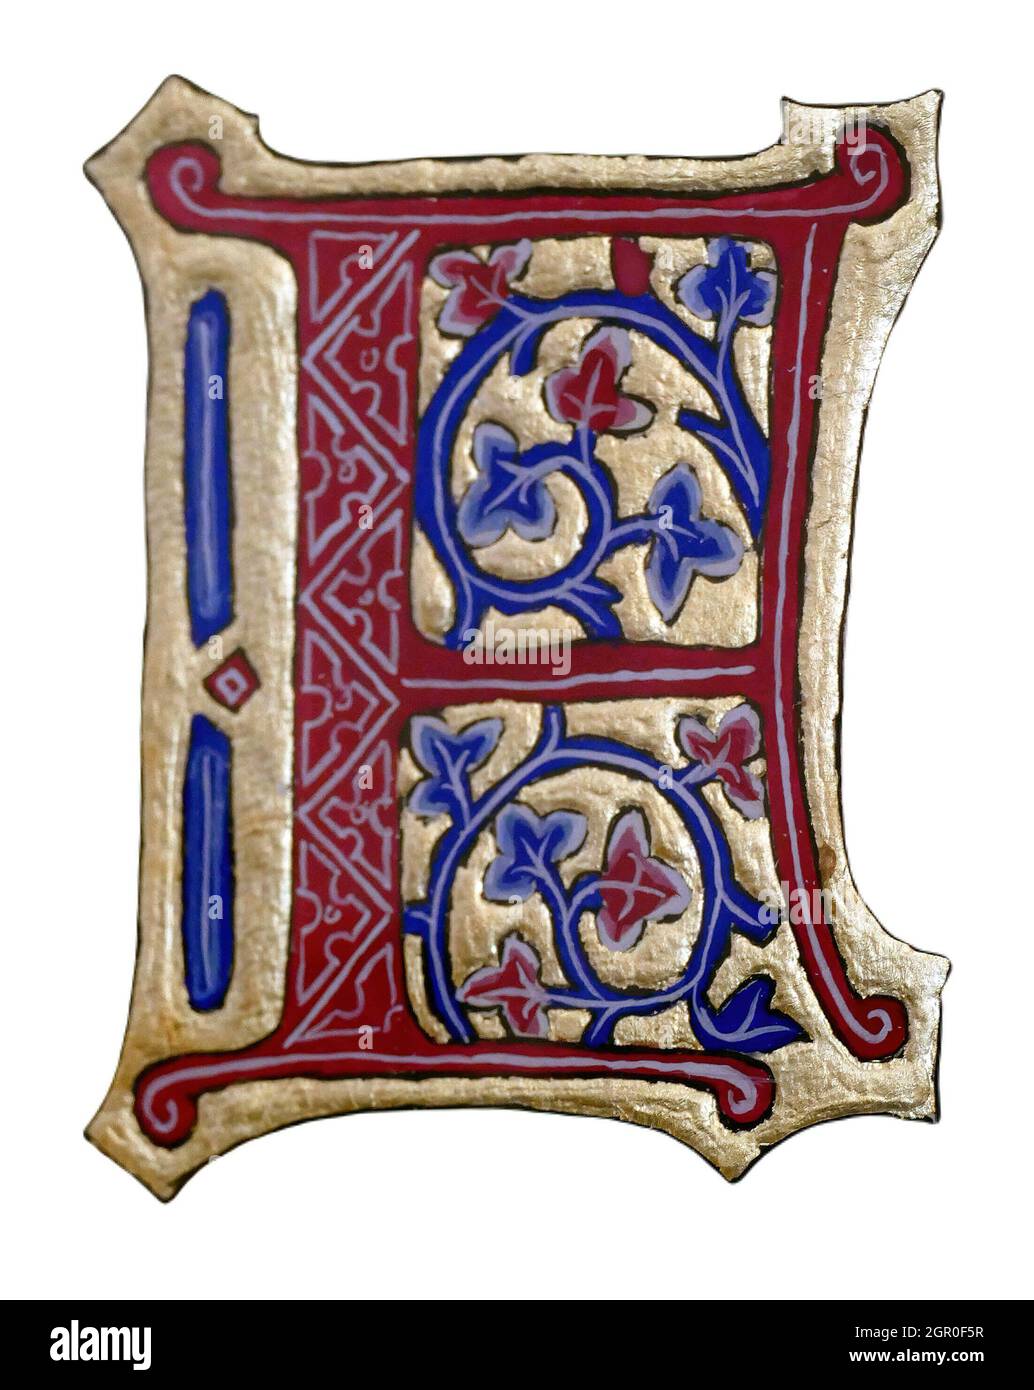 Closeup shot of a medieval illuminated letter from Croatia isolated on